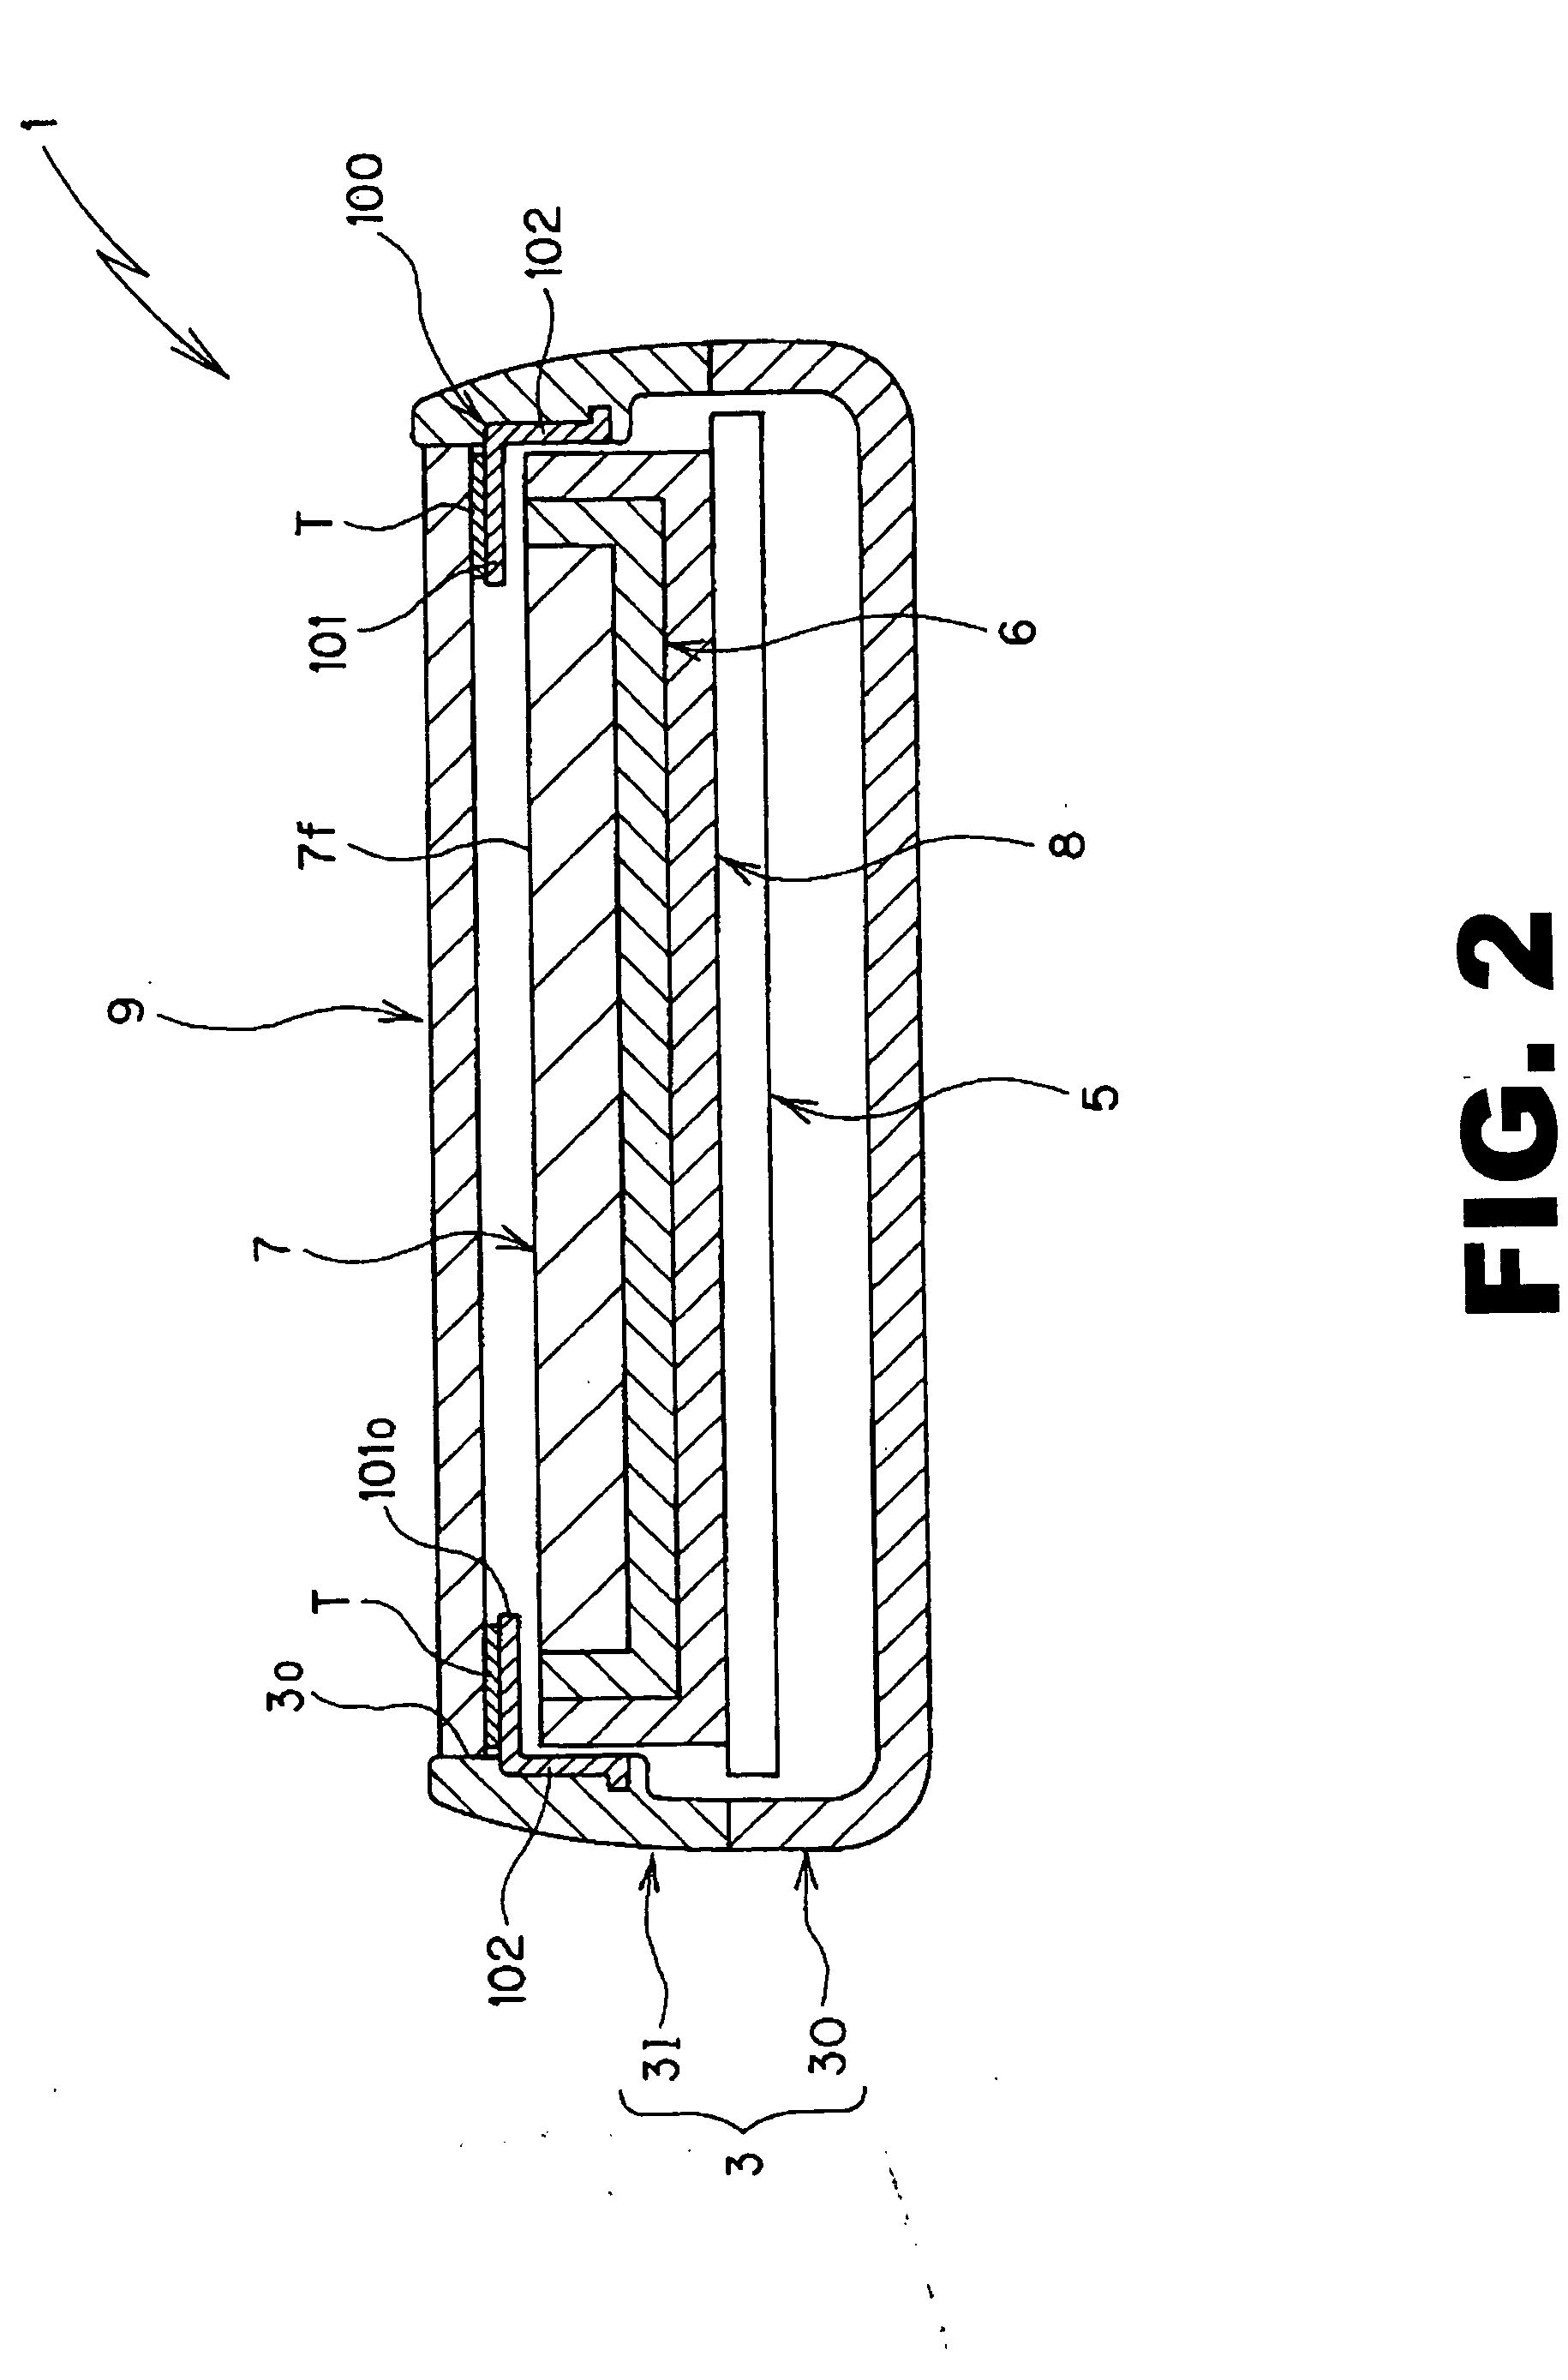 Liquid crystal display device protection structure for electronic equipment